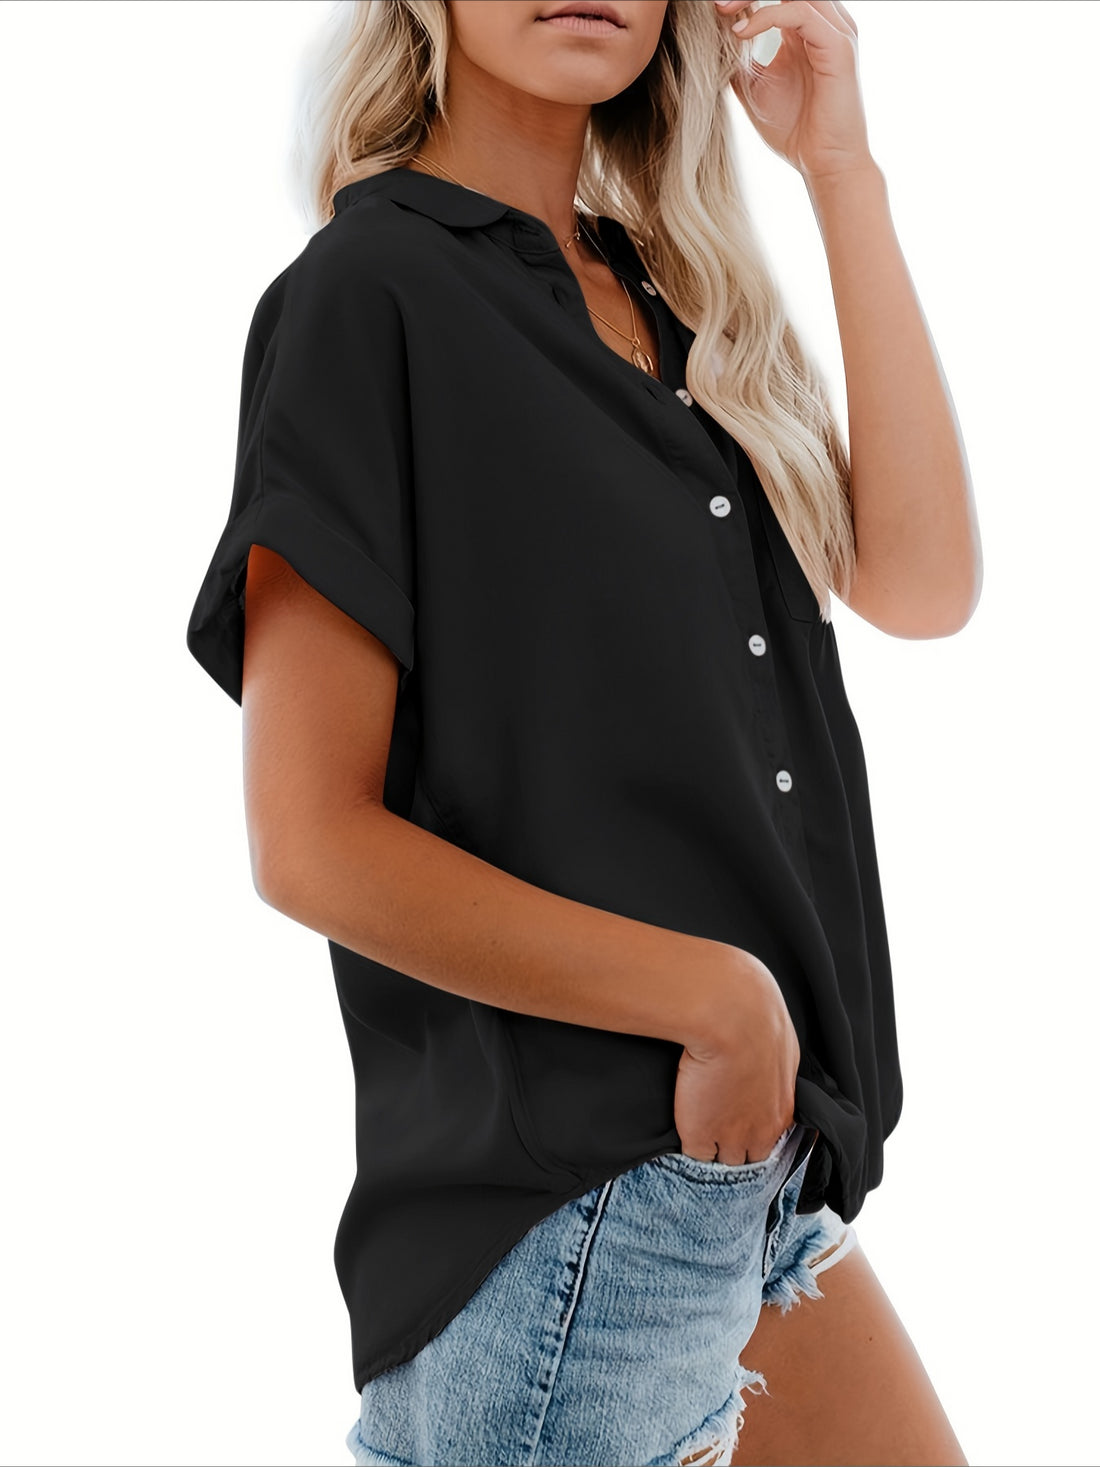 Women's V-Neck Button Blouse with Collar and Pocket - Casual Short Sleeve Loose Shirt for Fashionable Comfort